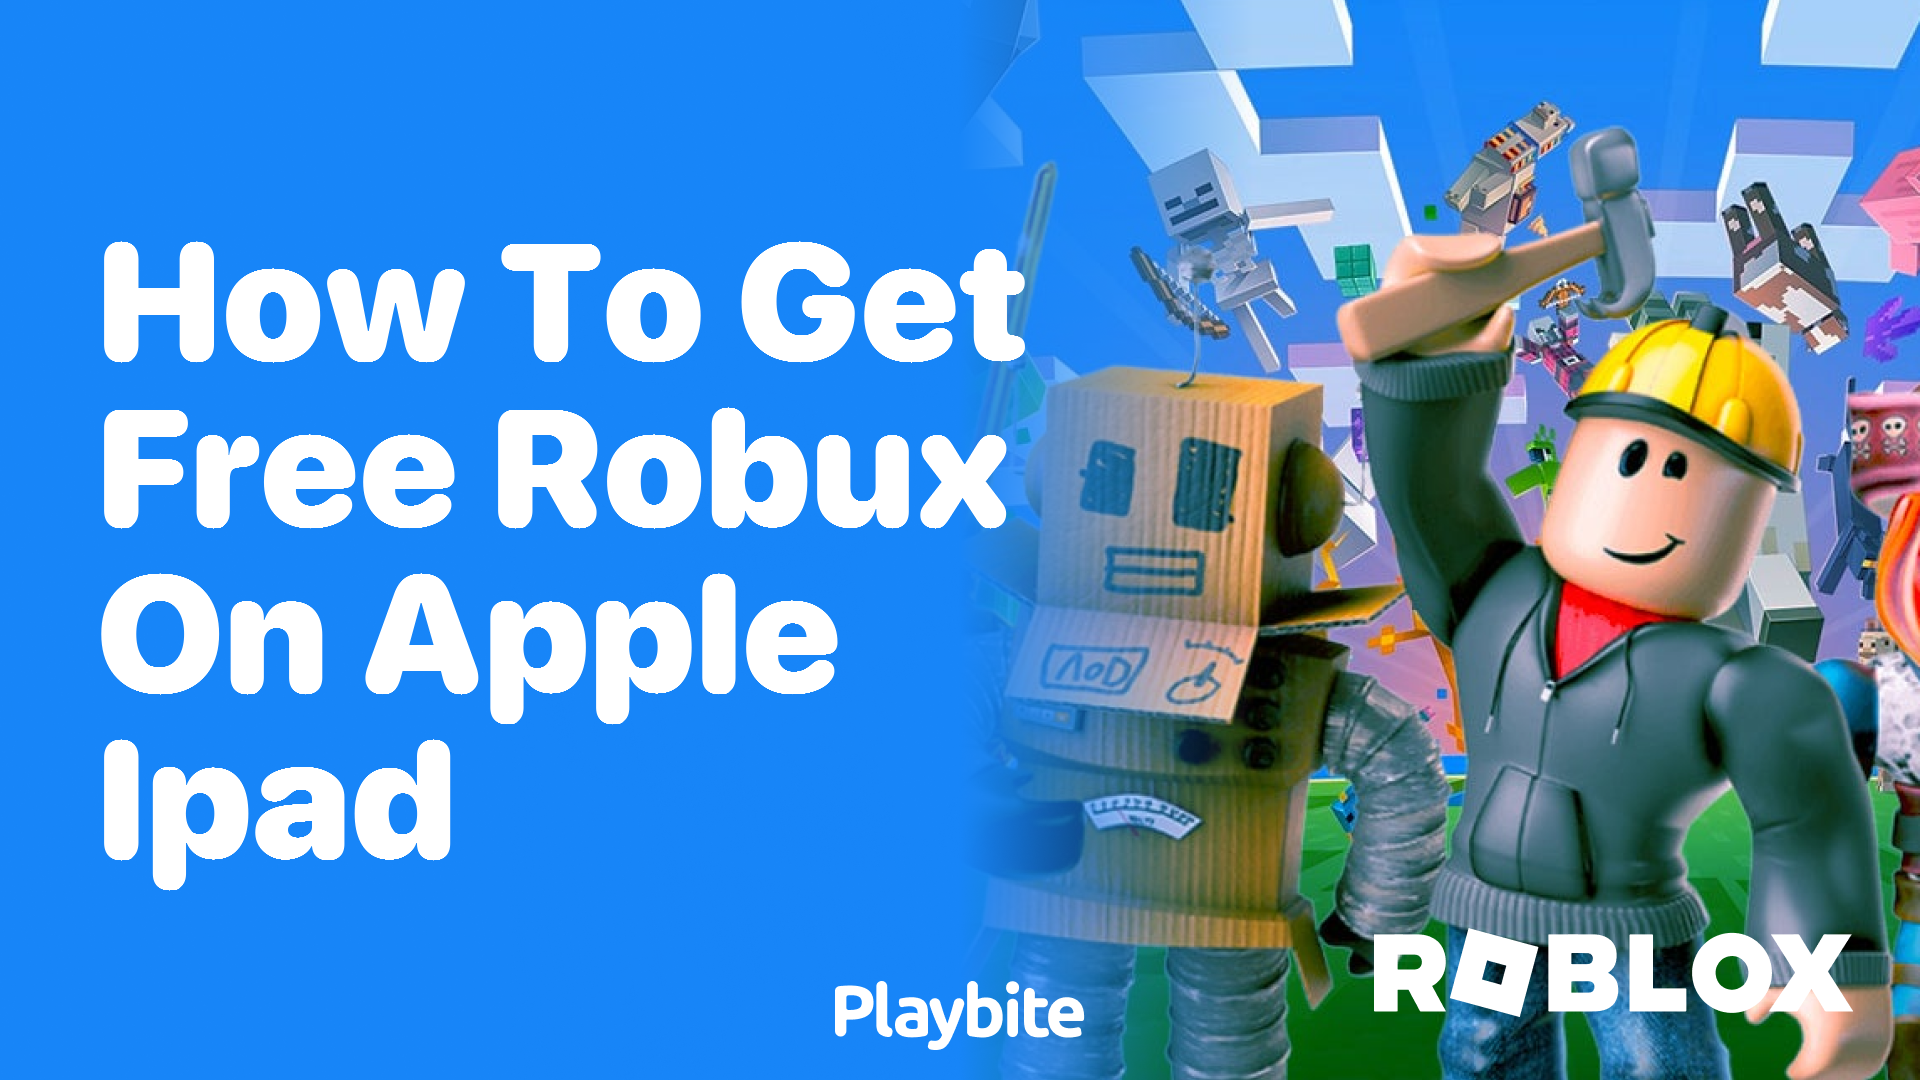 How to Get Free Robux on Apple iPad? - Playbite